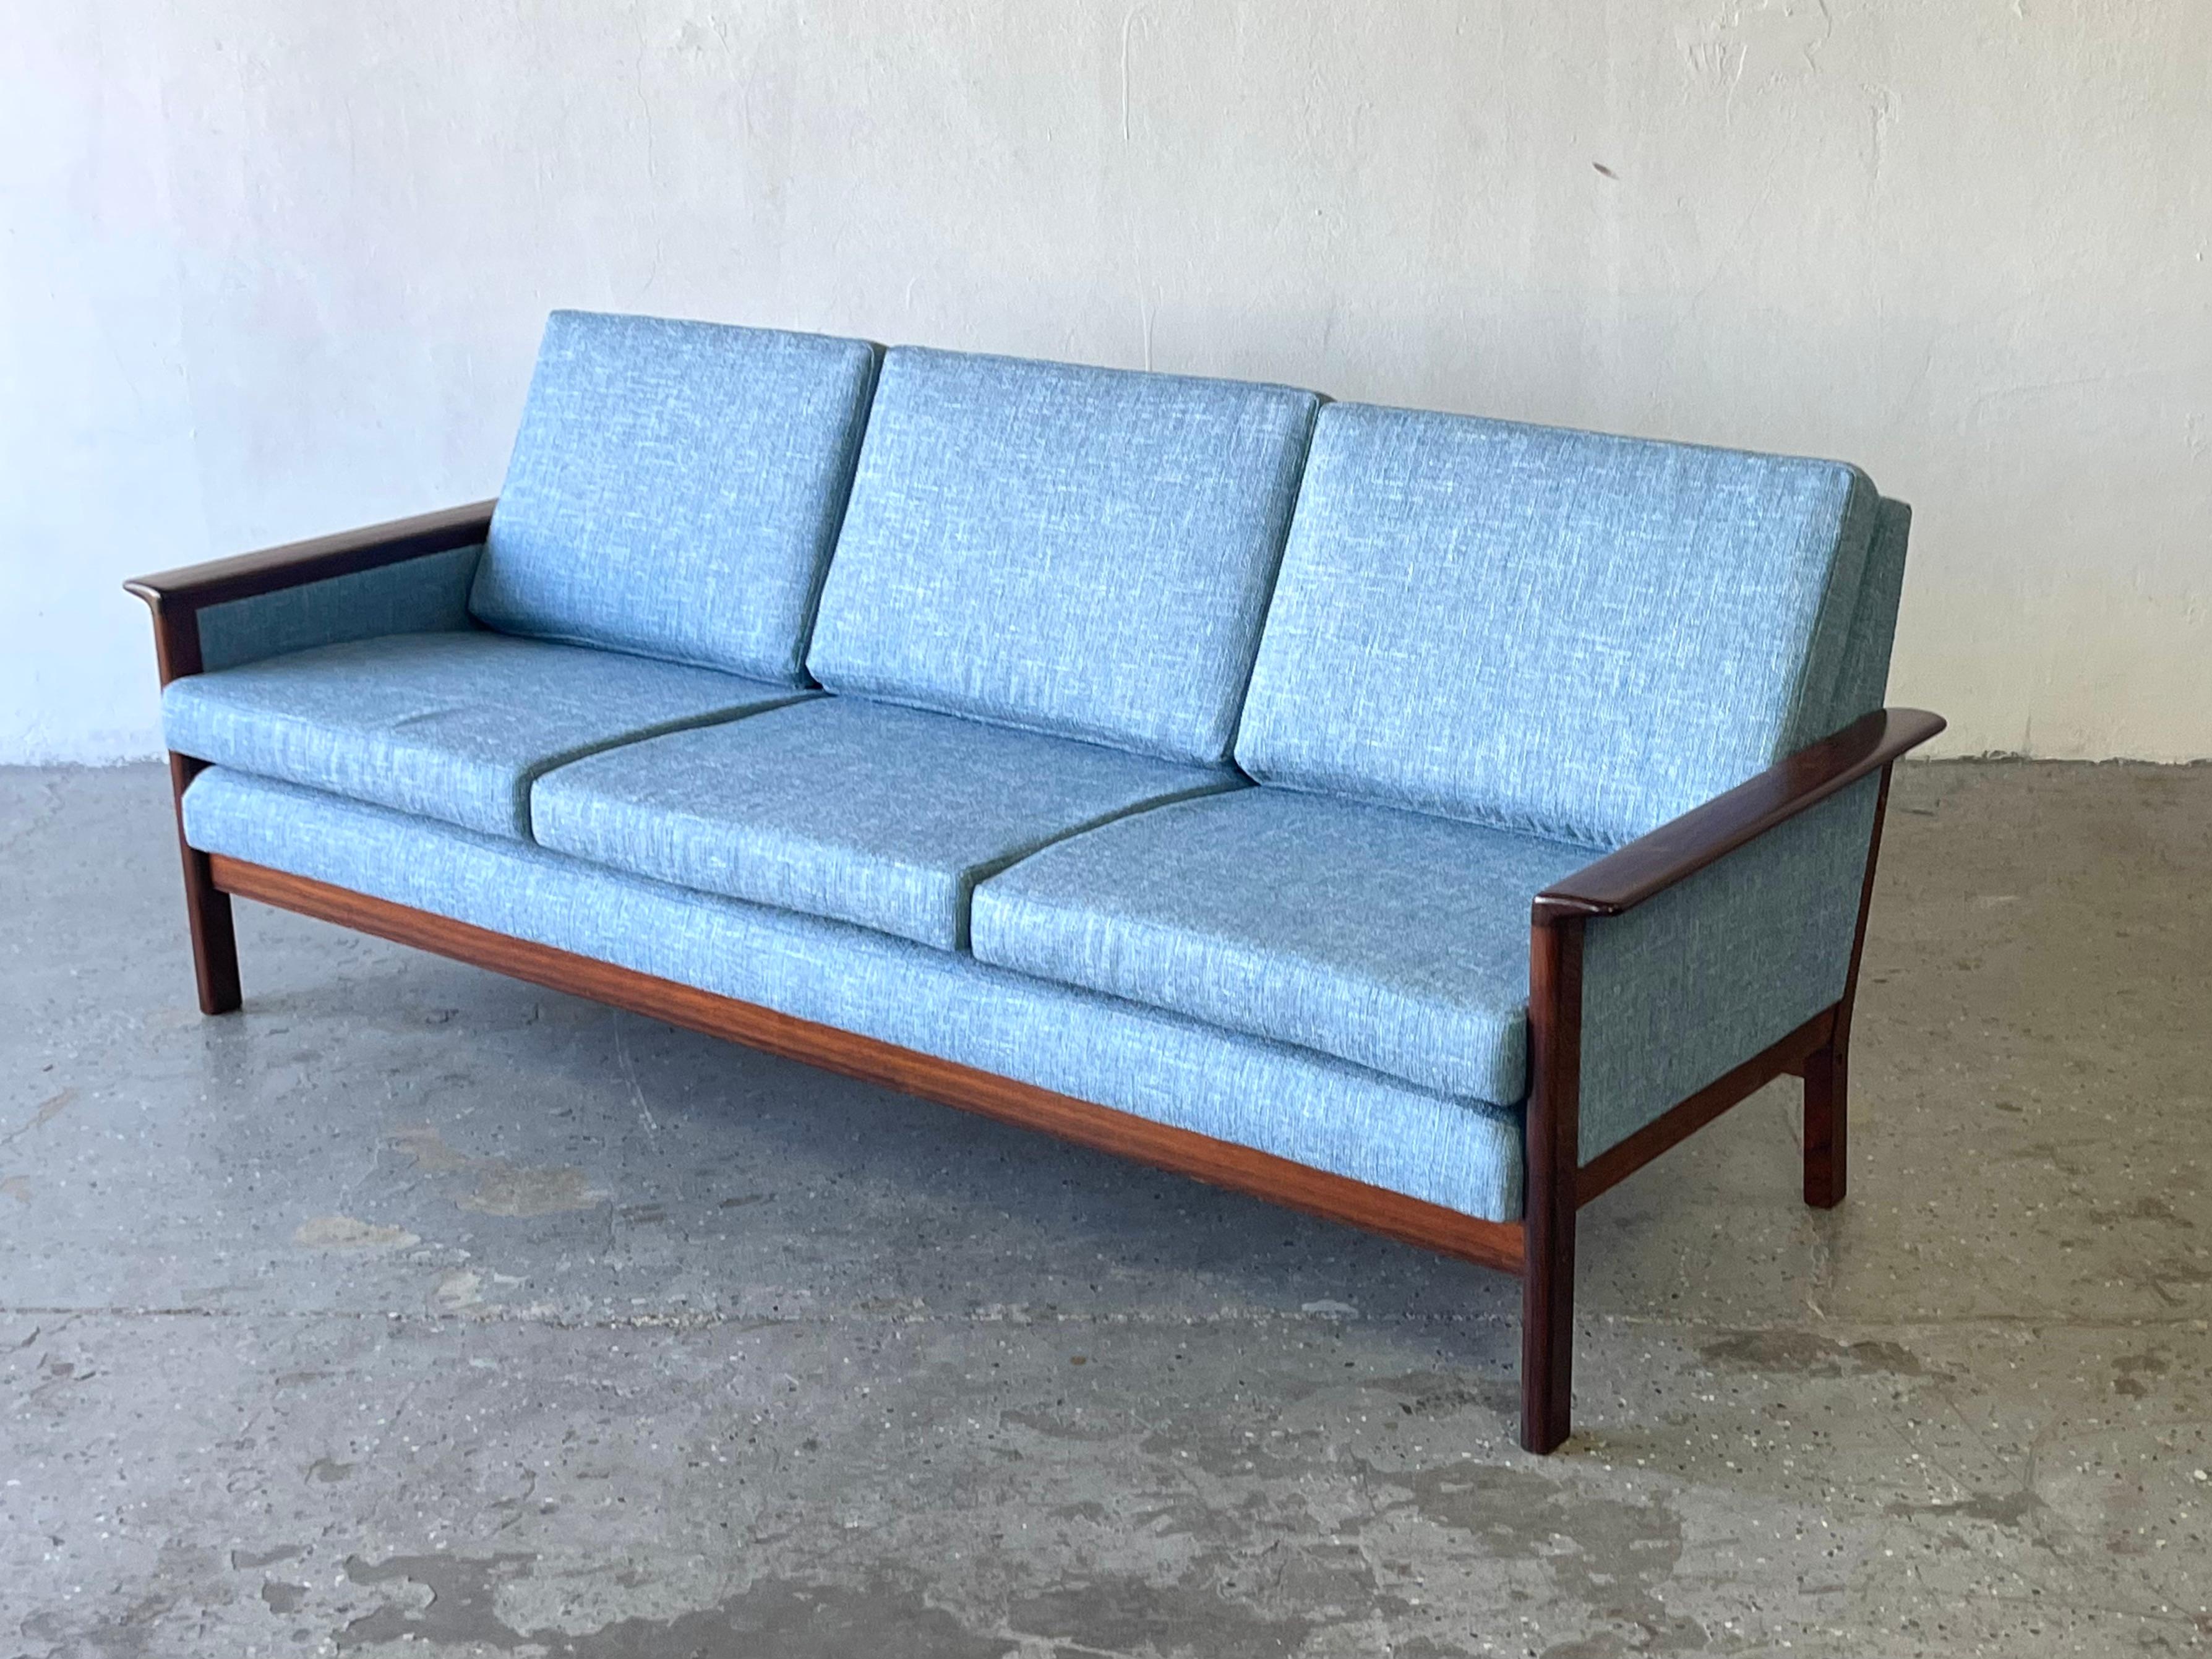 Vintage Danish Mid-Century Modern Rosewood Sofa & Lounge Chair by Westnofa In Excellent Condition For Sale In Las Vegas, NV